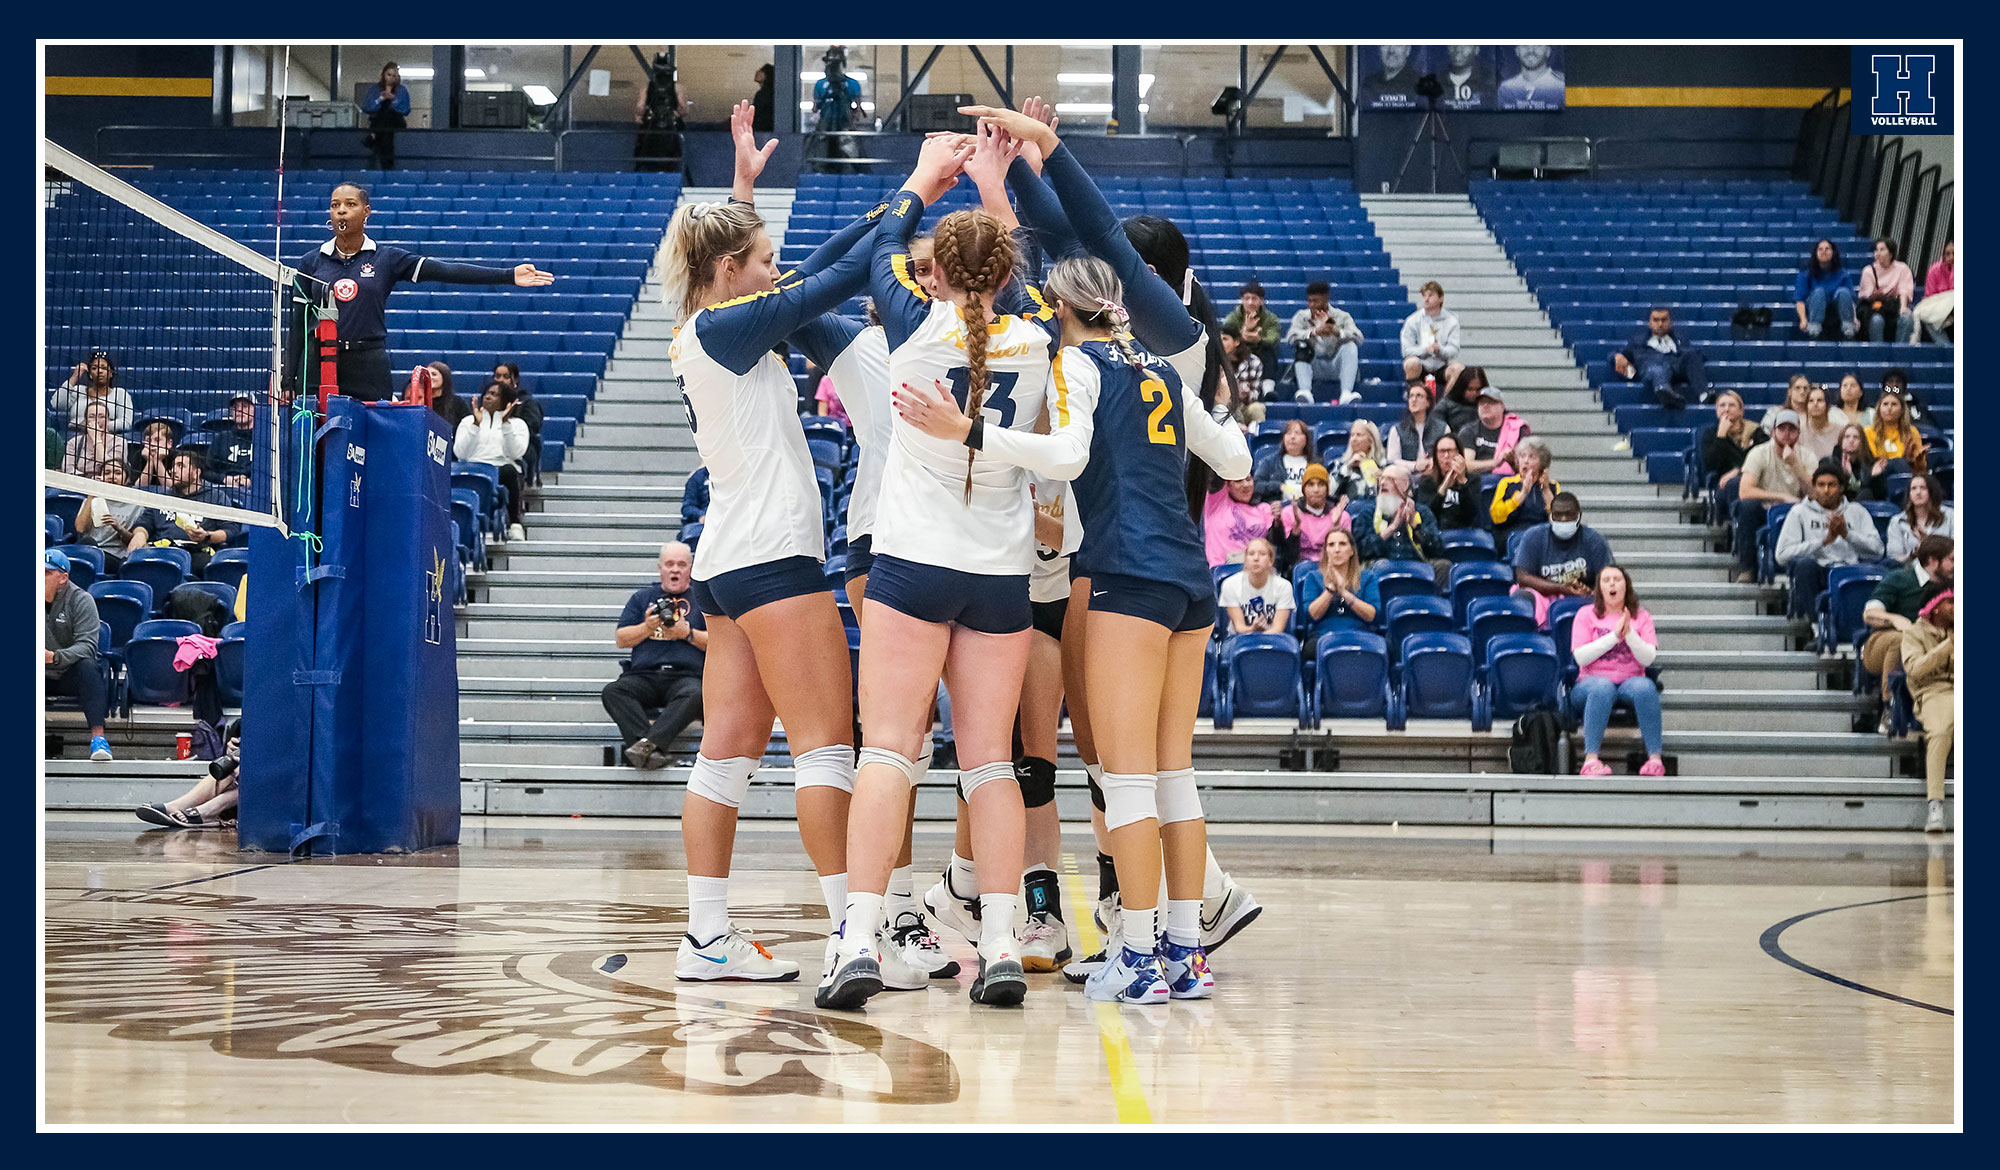 Women's volleyball celebrates a point